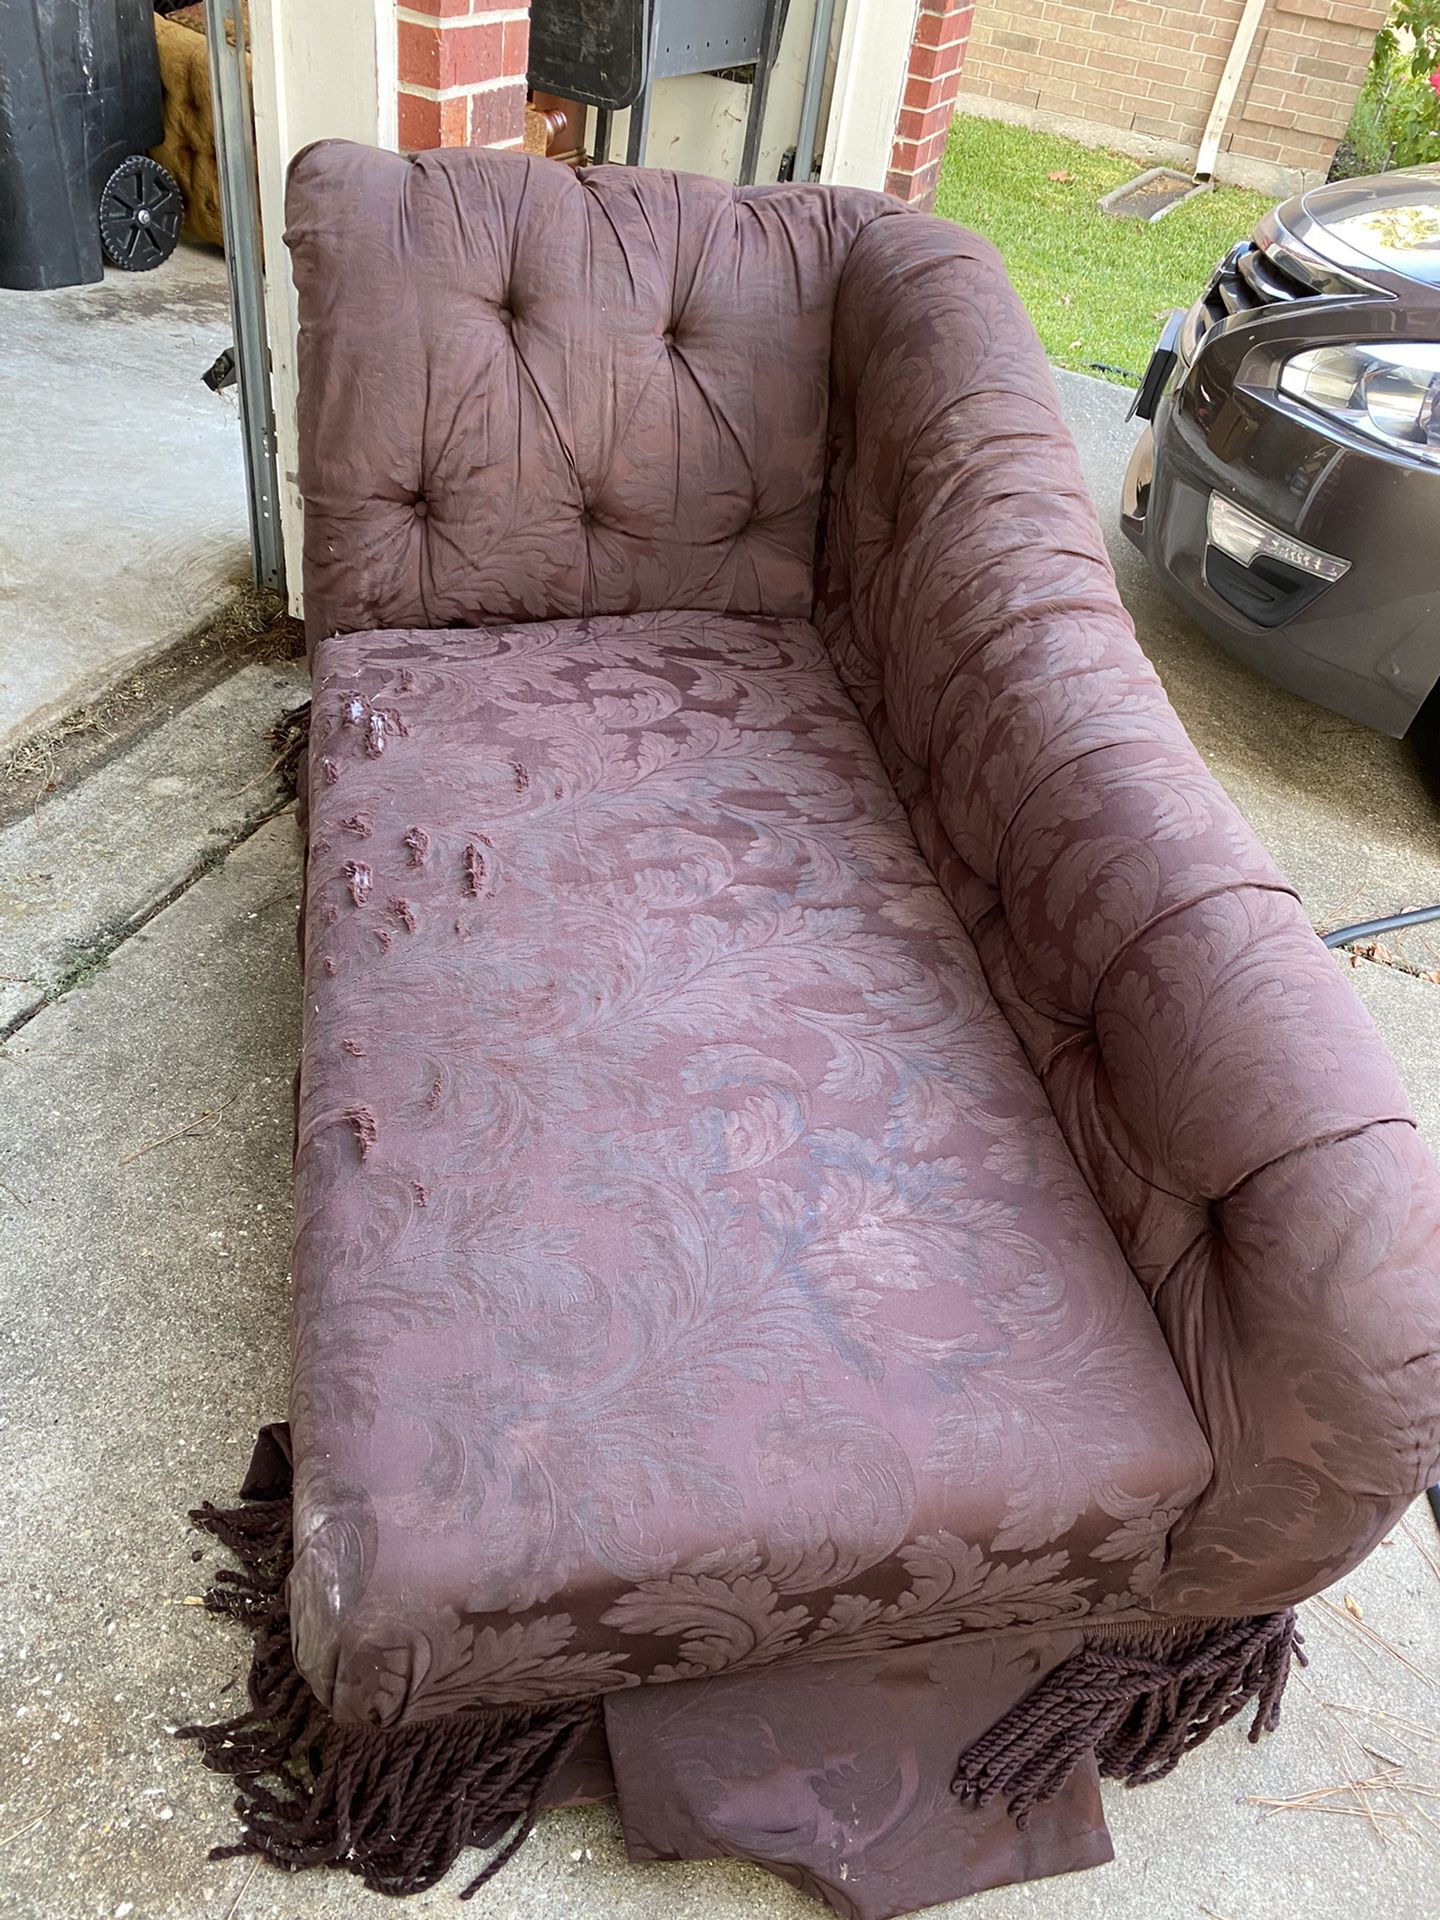 Free furniture-FREE Maroon Chaise Lounge (In Katy-no delivery)